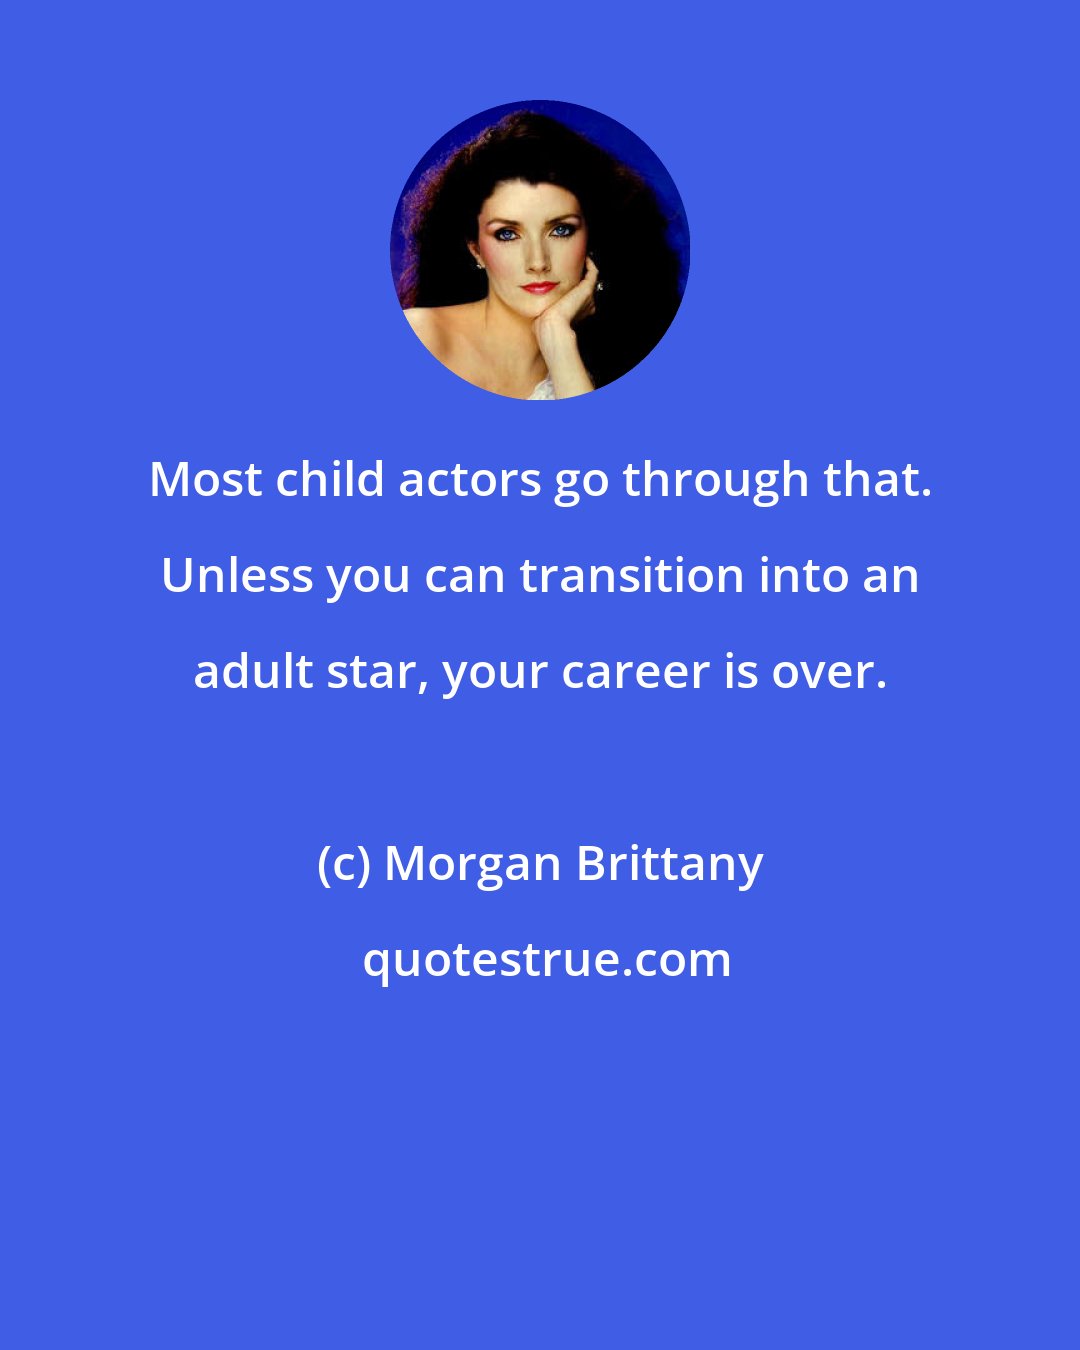 Morgan Brittany: Most child actors go through that. Unless you can transition into an adult star, your career is over.